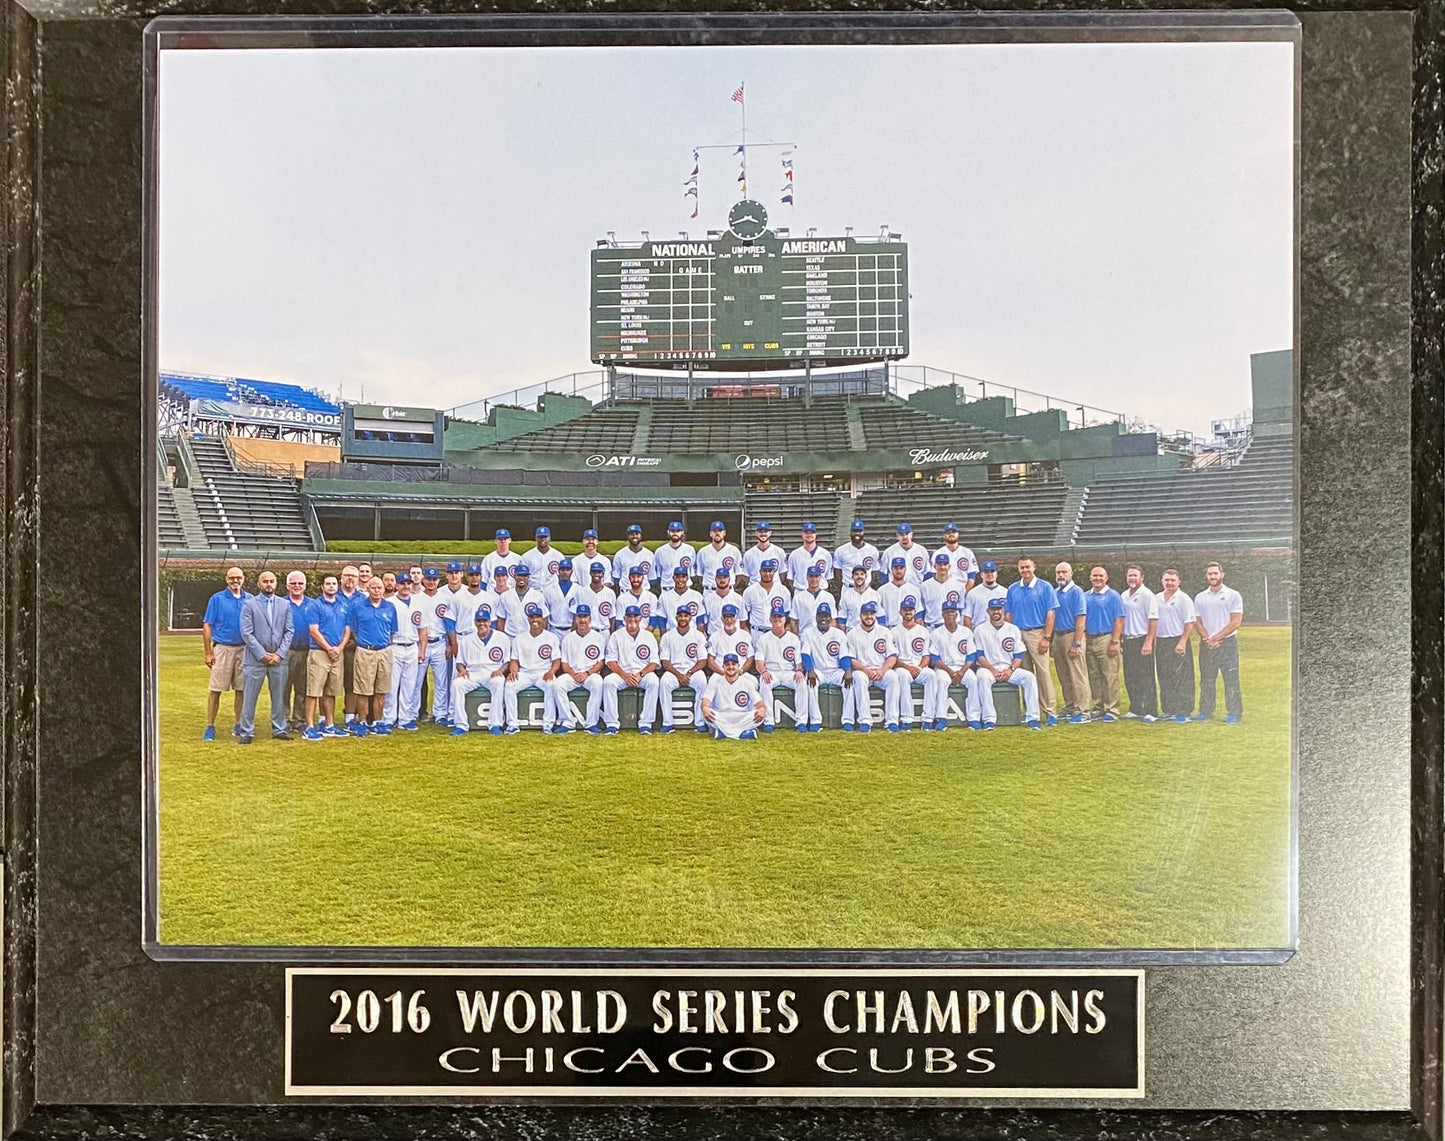 Chicago Cubs 2016 World Series Champions Team Photo Wall Plaque